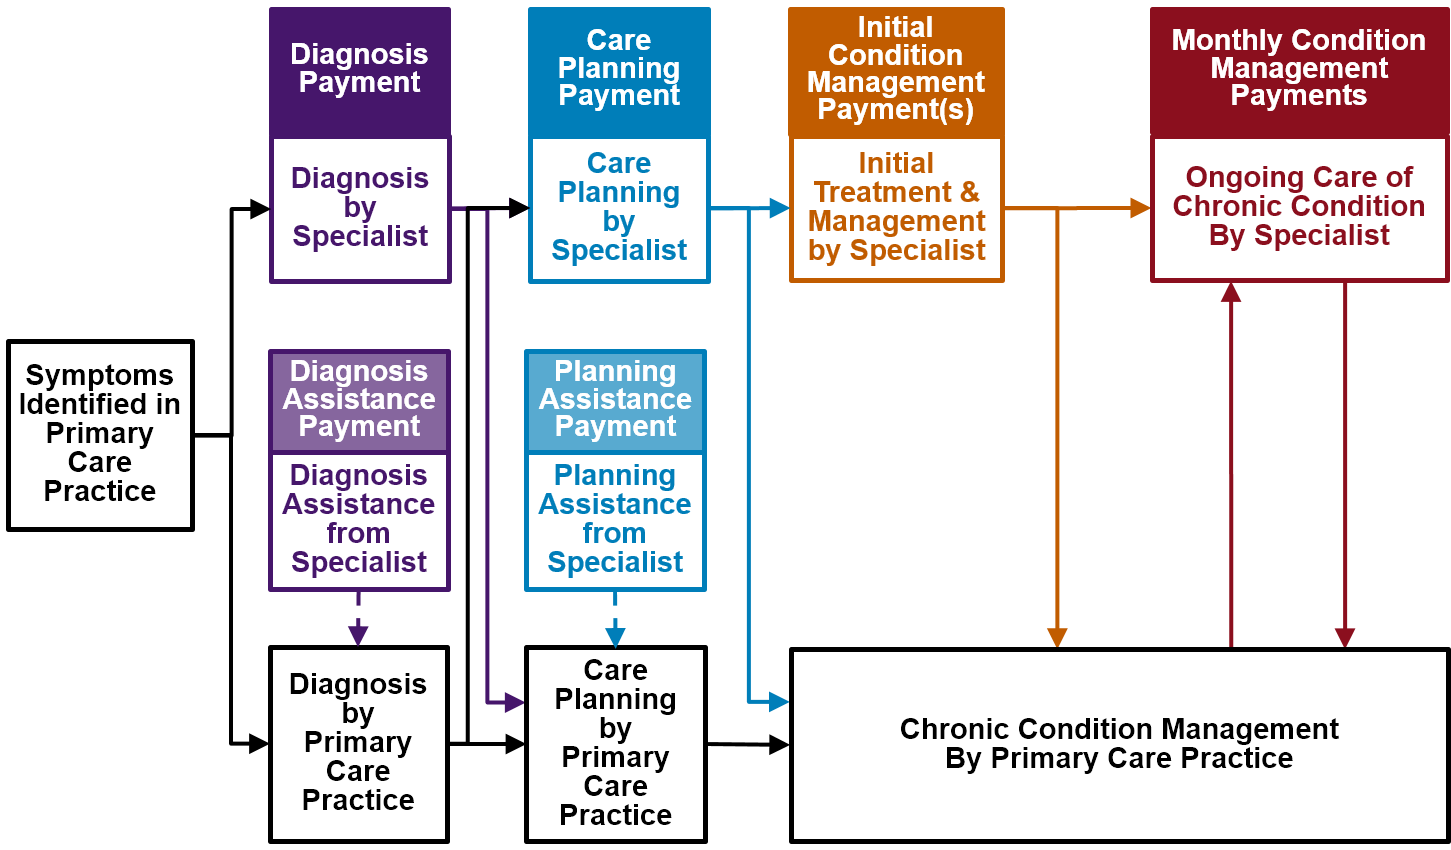 Payments in Each Phase of Care Under Patient-Centered Payment for Care of Chronic Conditions
						